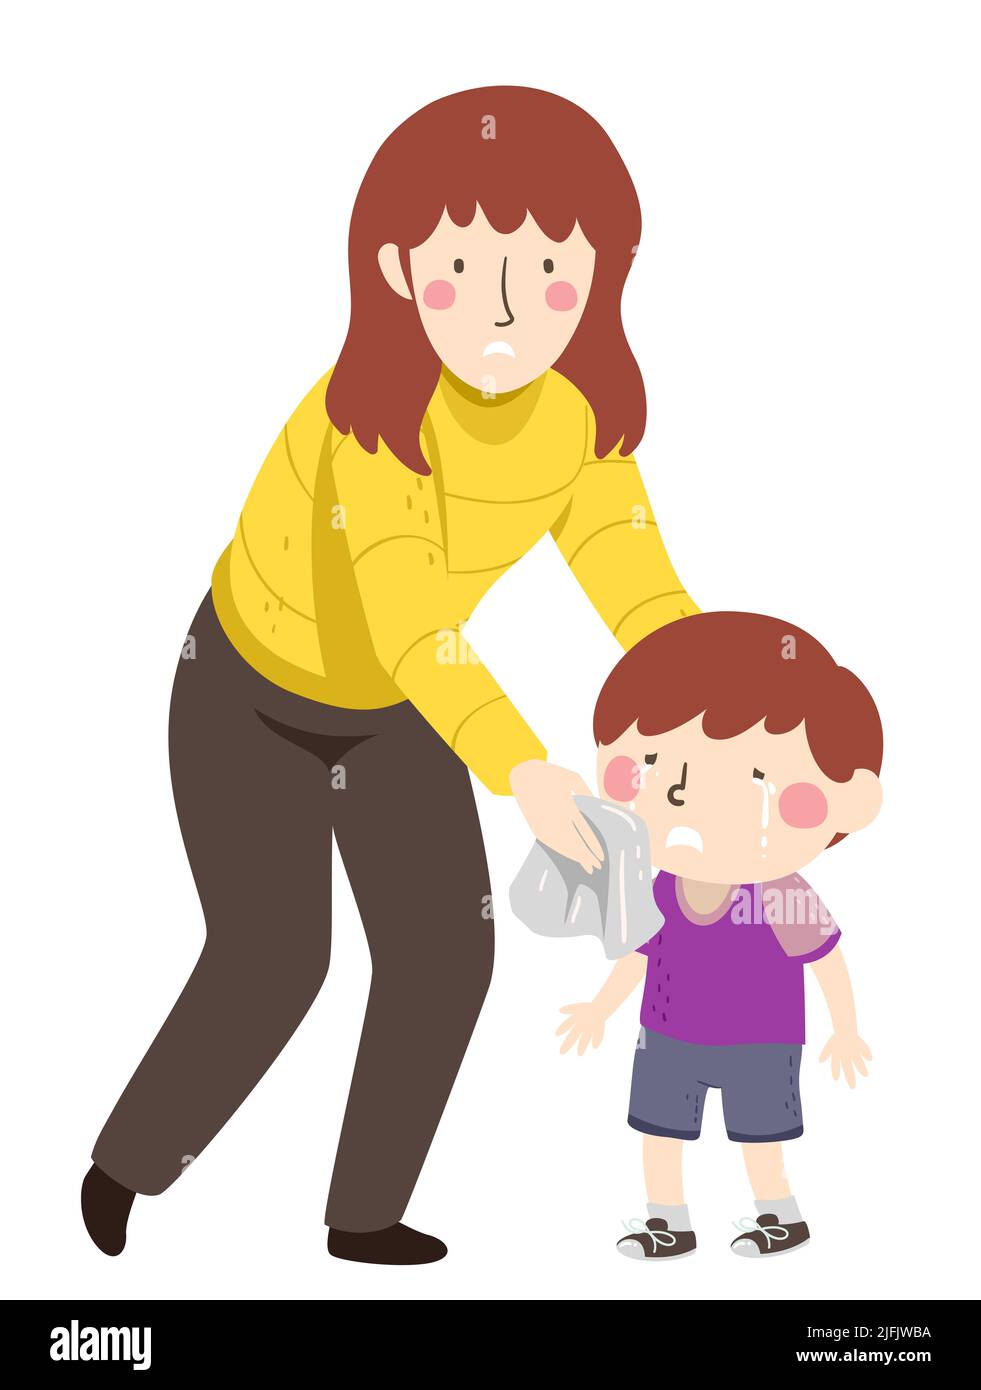 Illustration of Kid Boy Crying with Mom Beside Him Wiping His Tears with a Handkerchief Stock Photo